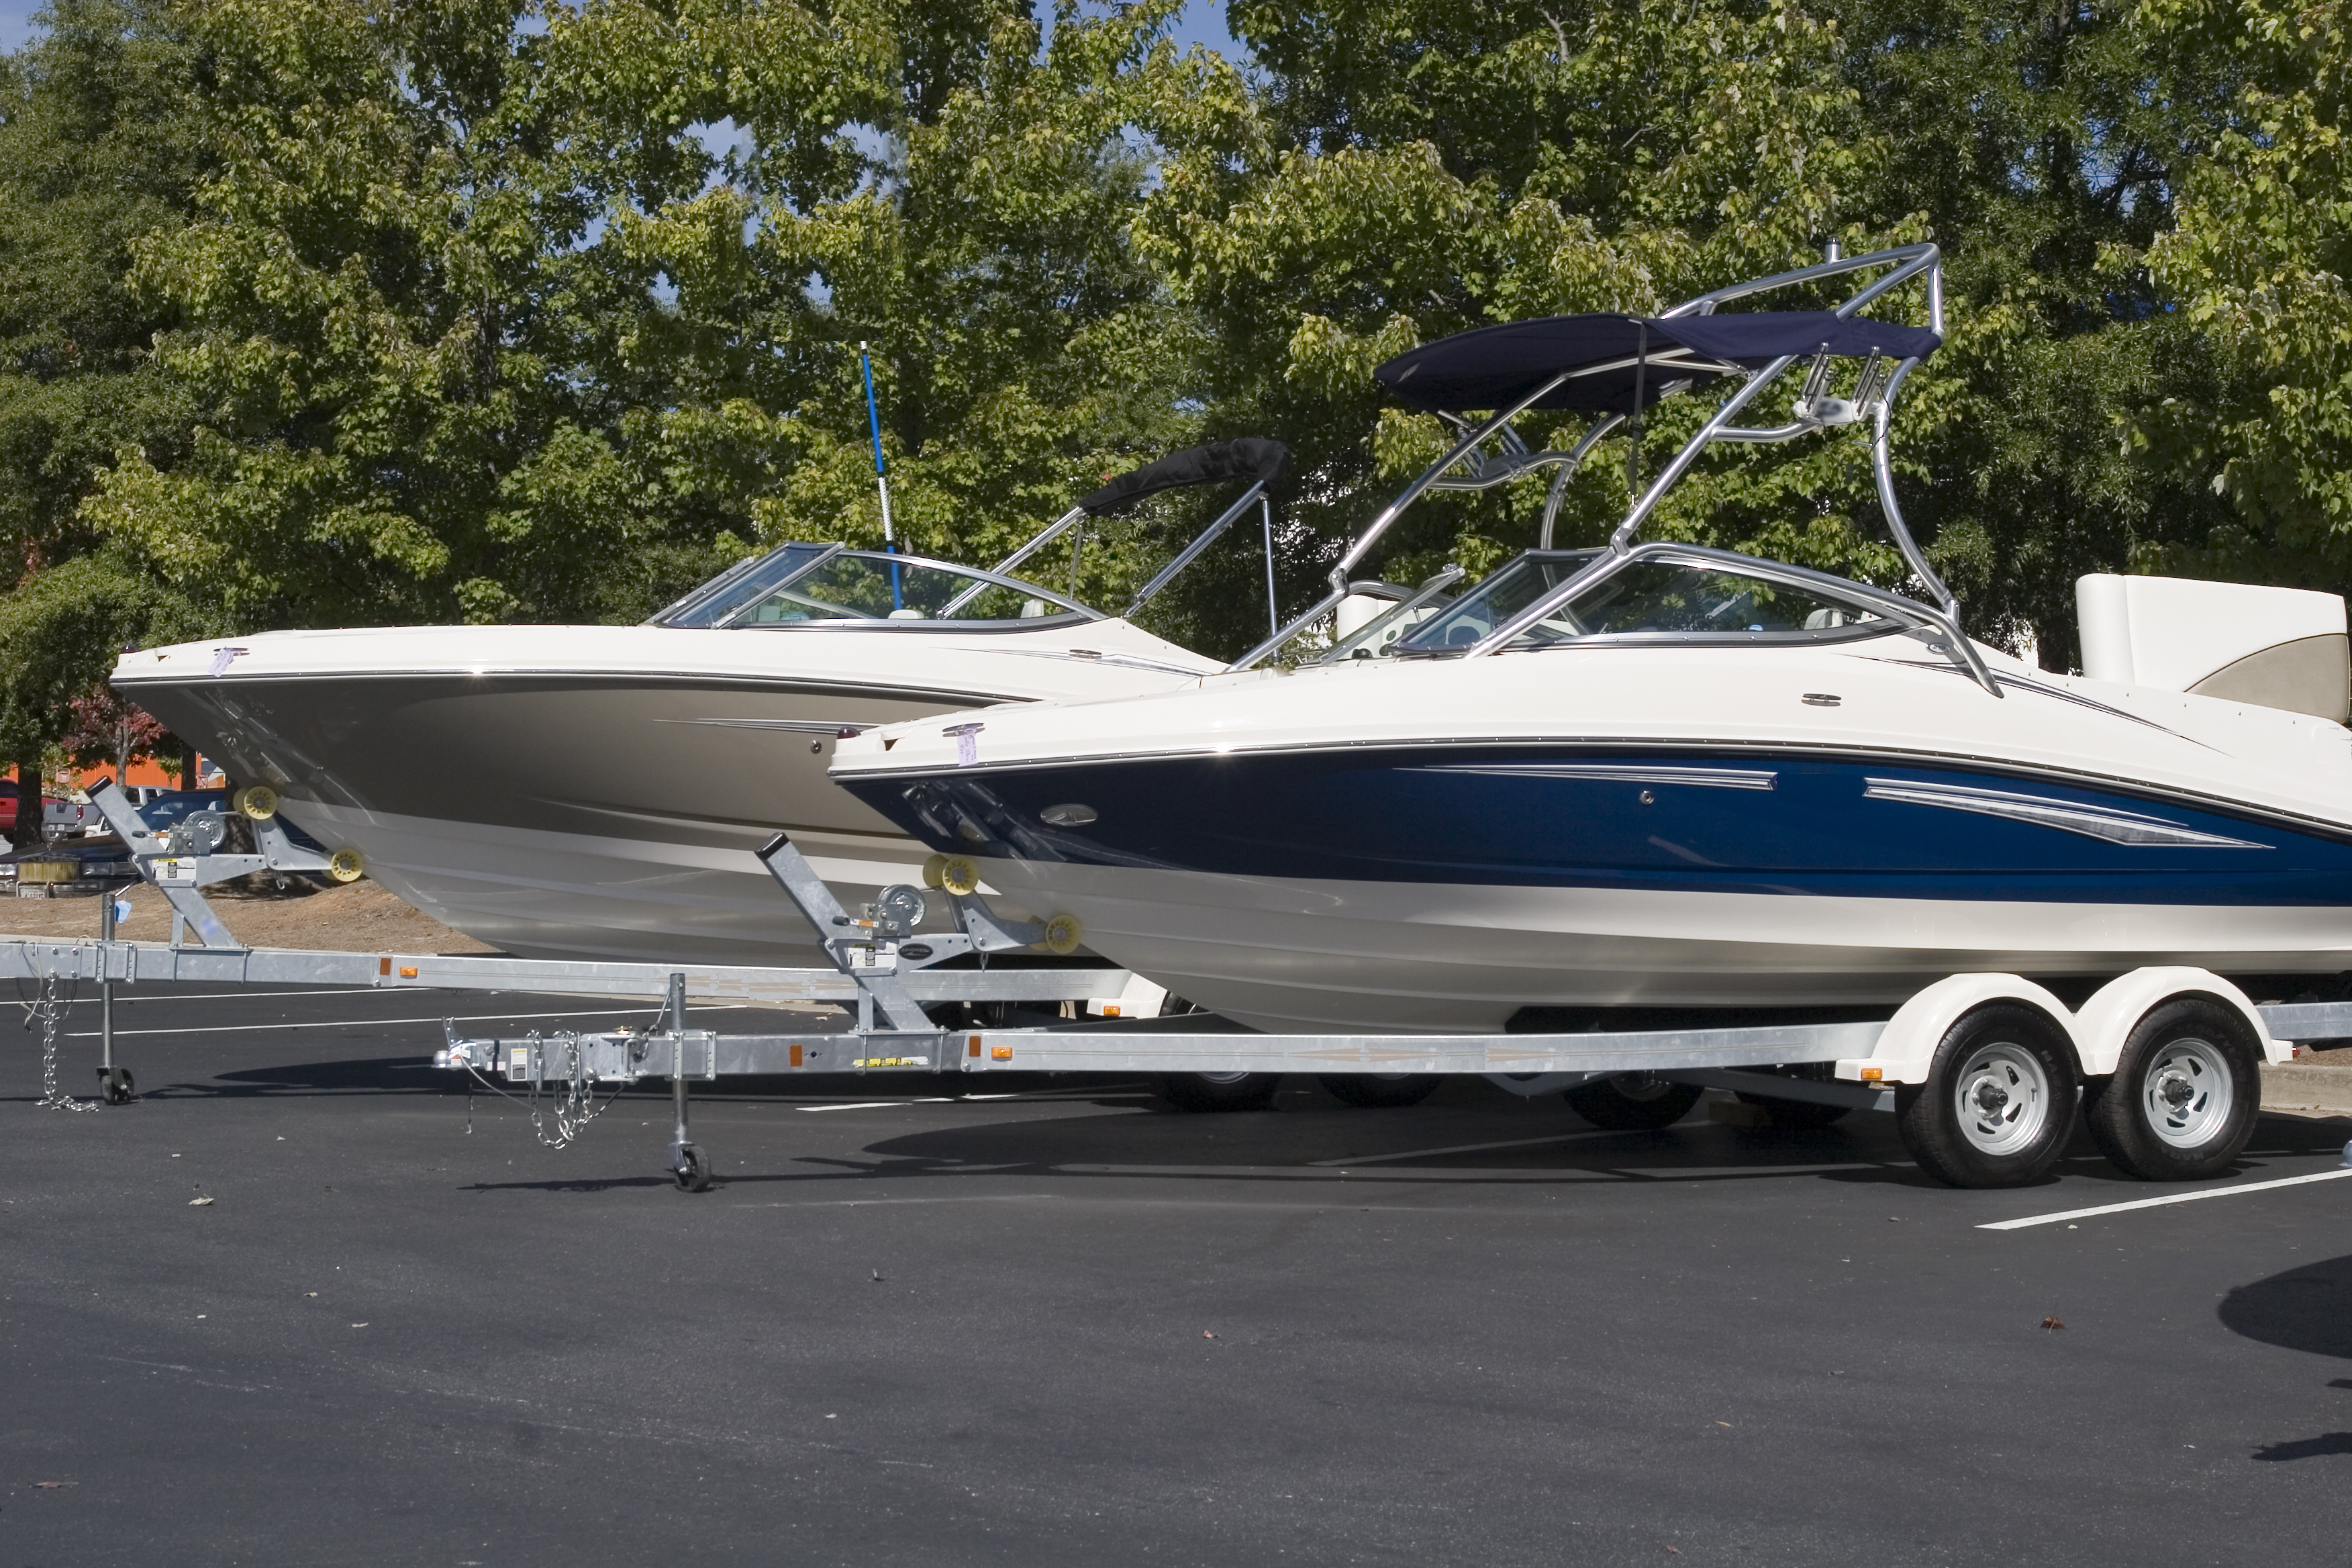 indoor/outdoor rv, boat, and vehicle parking in plainfield ct